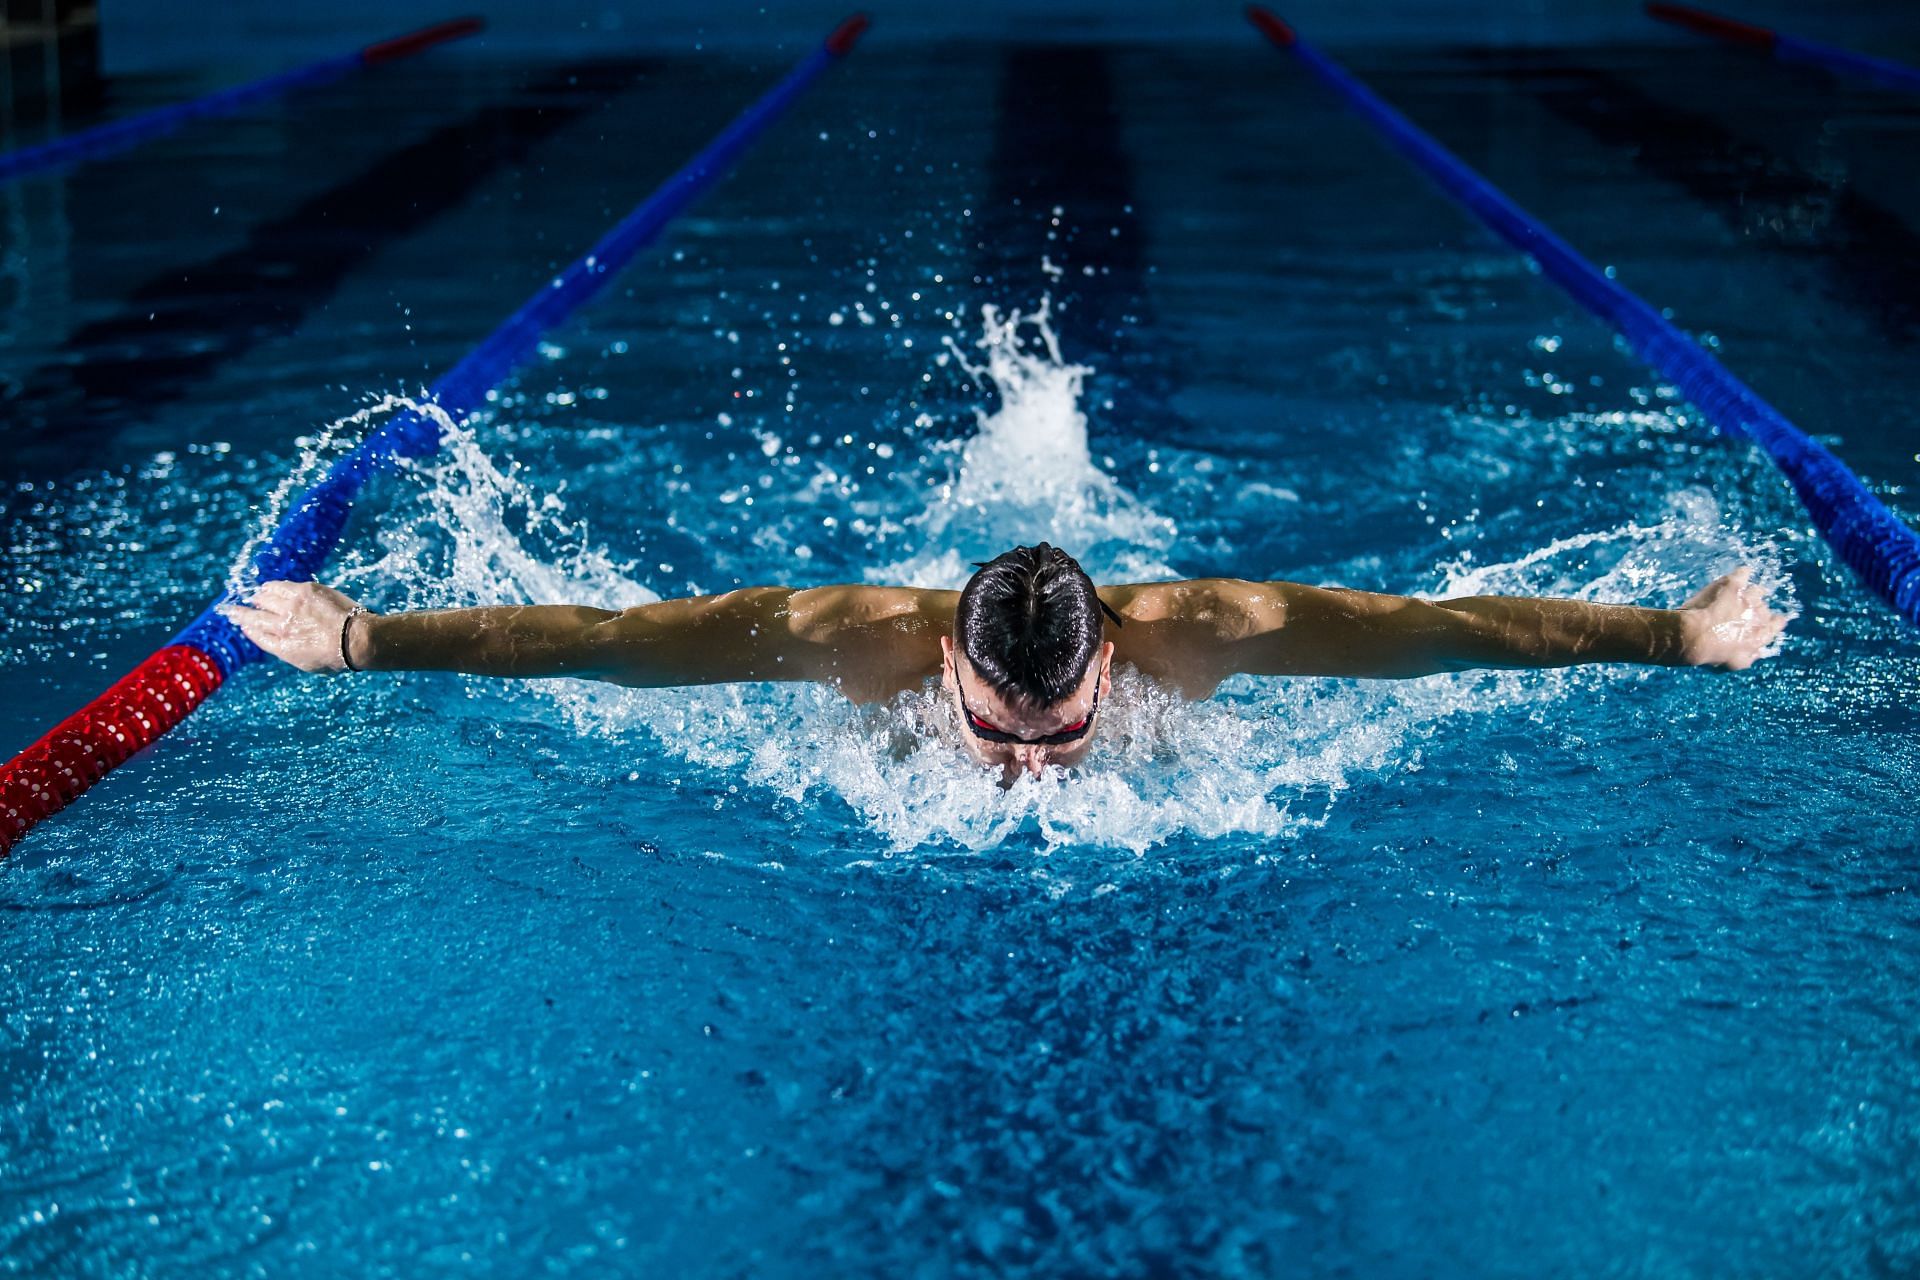 Try the six exercises to build strength and stamina for your next swim meet! (Image via unsplash/Gentrit Sylejmani)